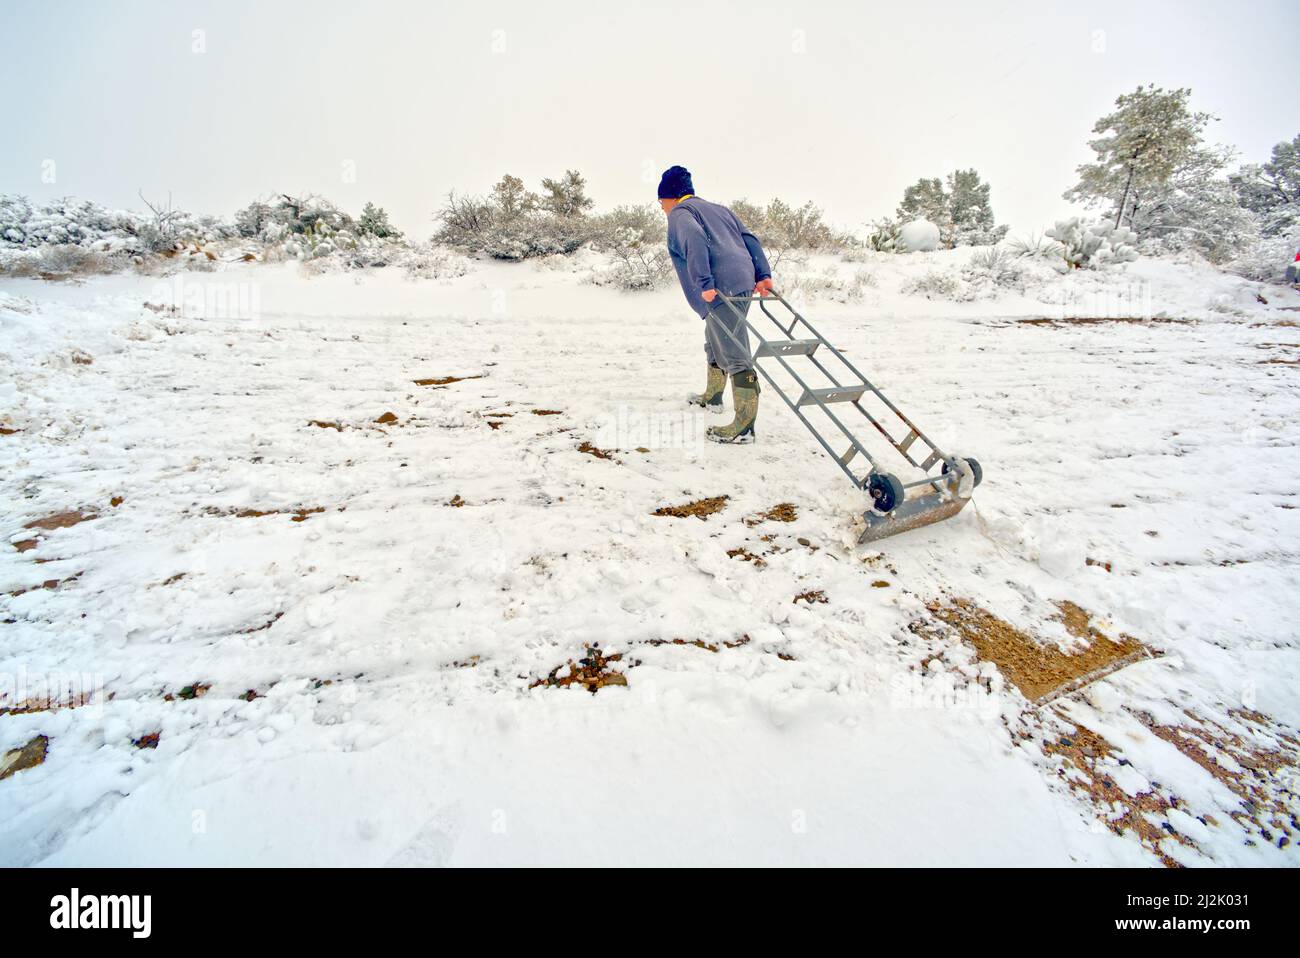 Man using an upside down appliance Dolly to clear snow, Chino Valley, Arizona, USA Stock Photo